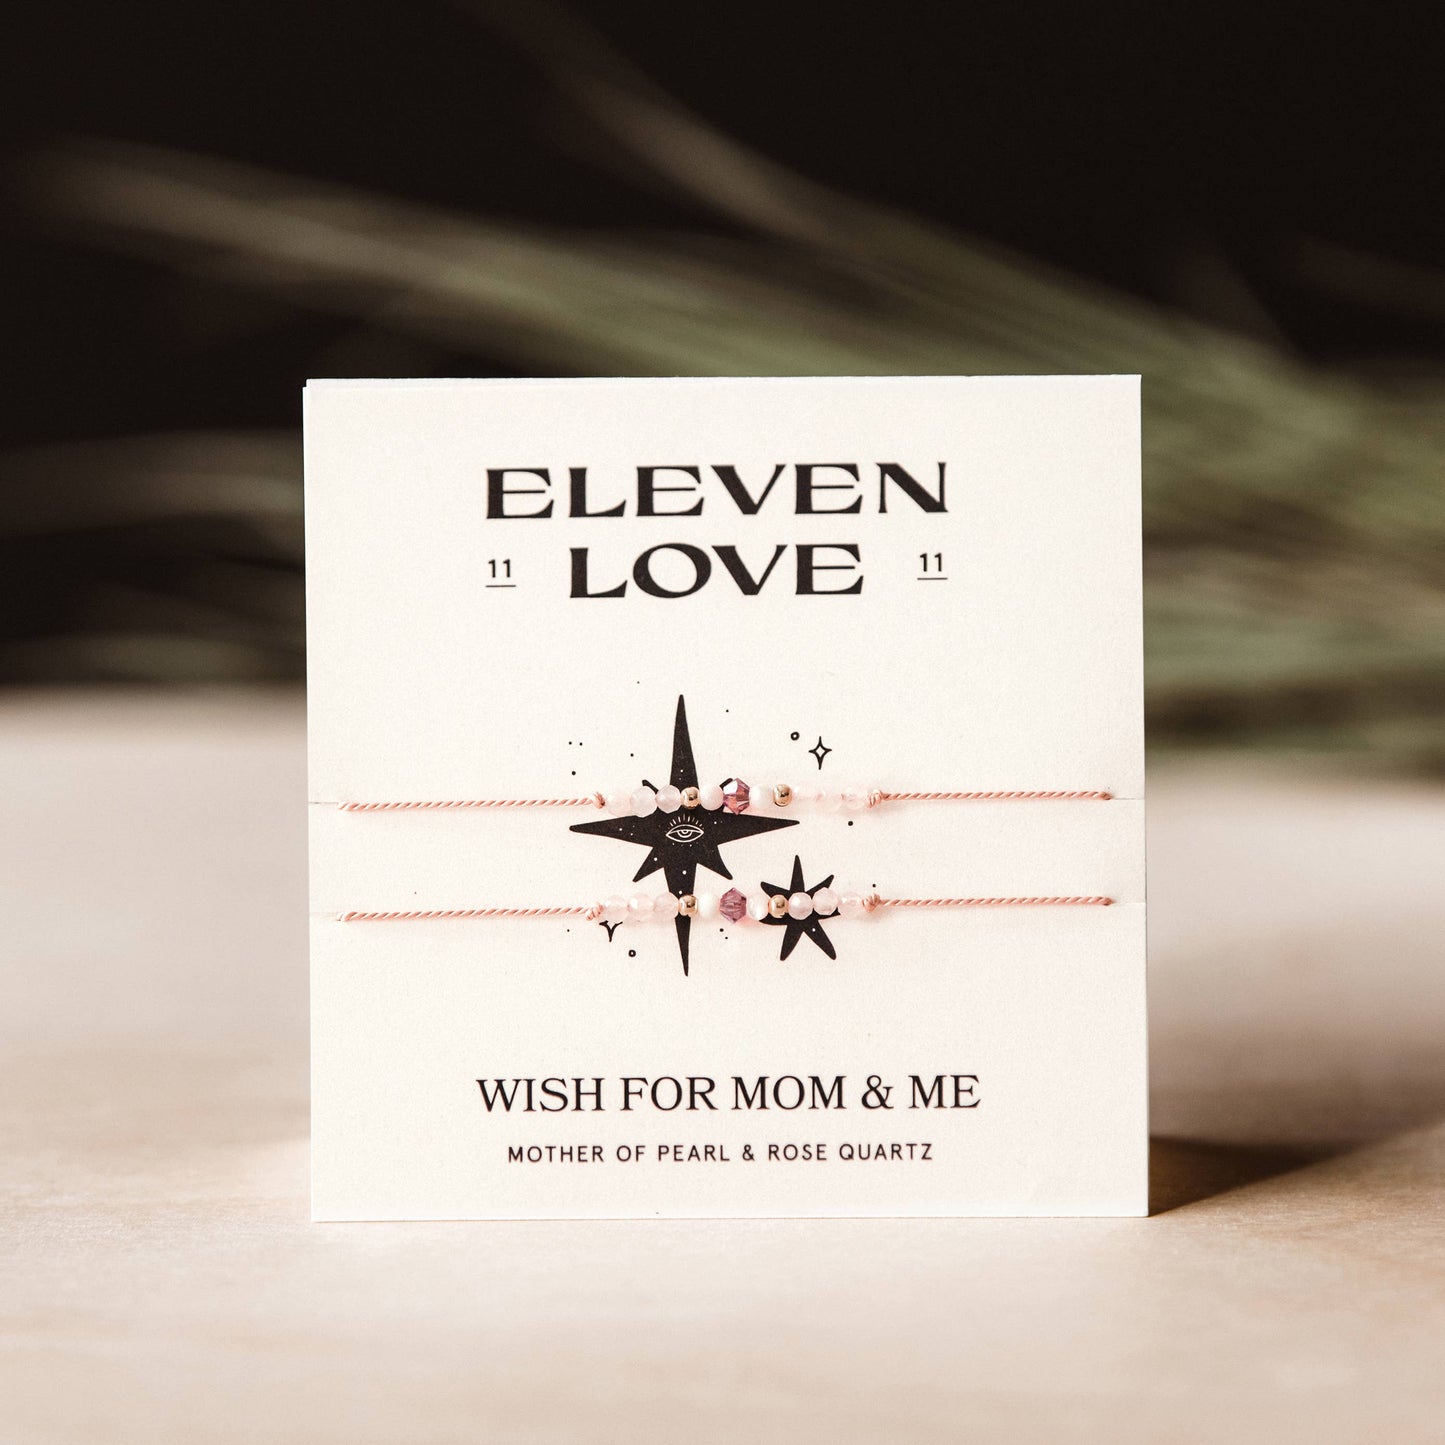 Eleven Love | A Wish for Mom & Me Wish - Bracelets - Set of 2